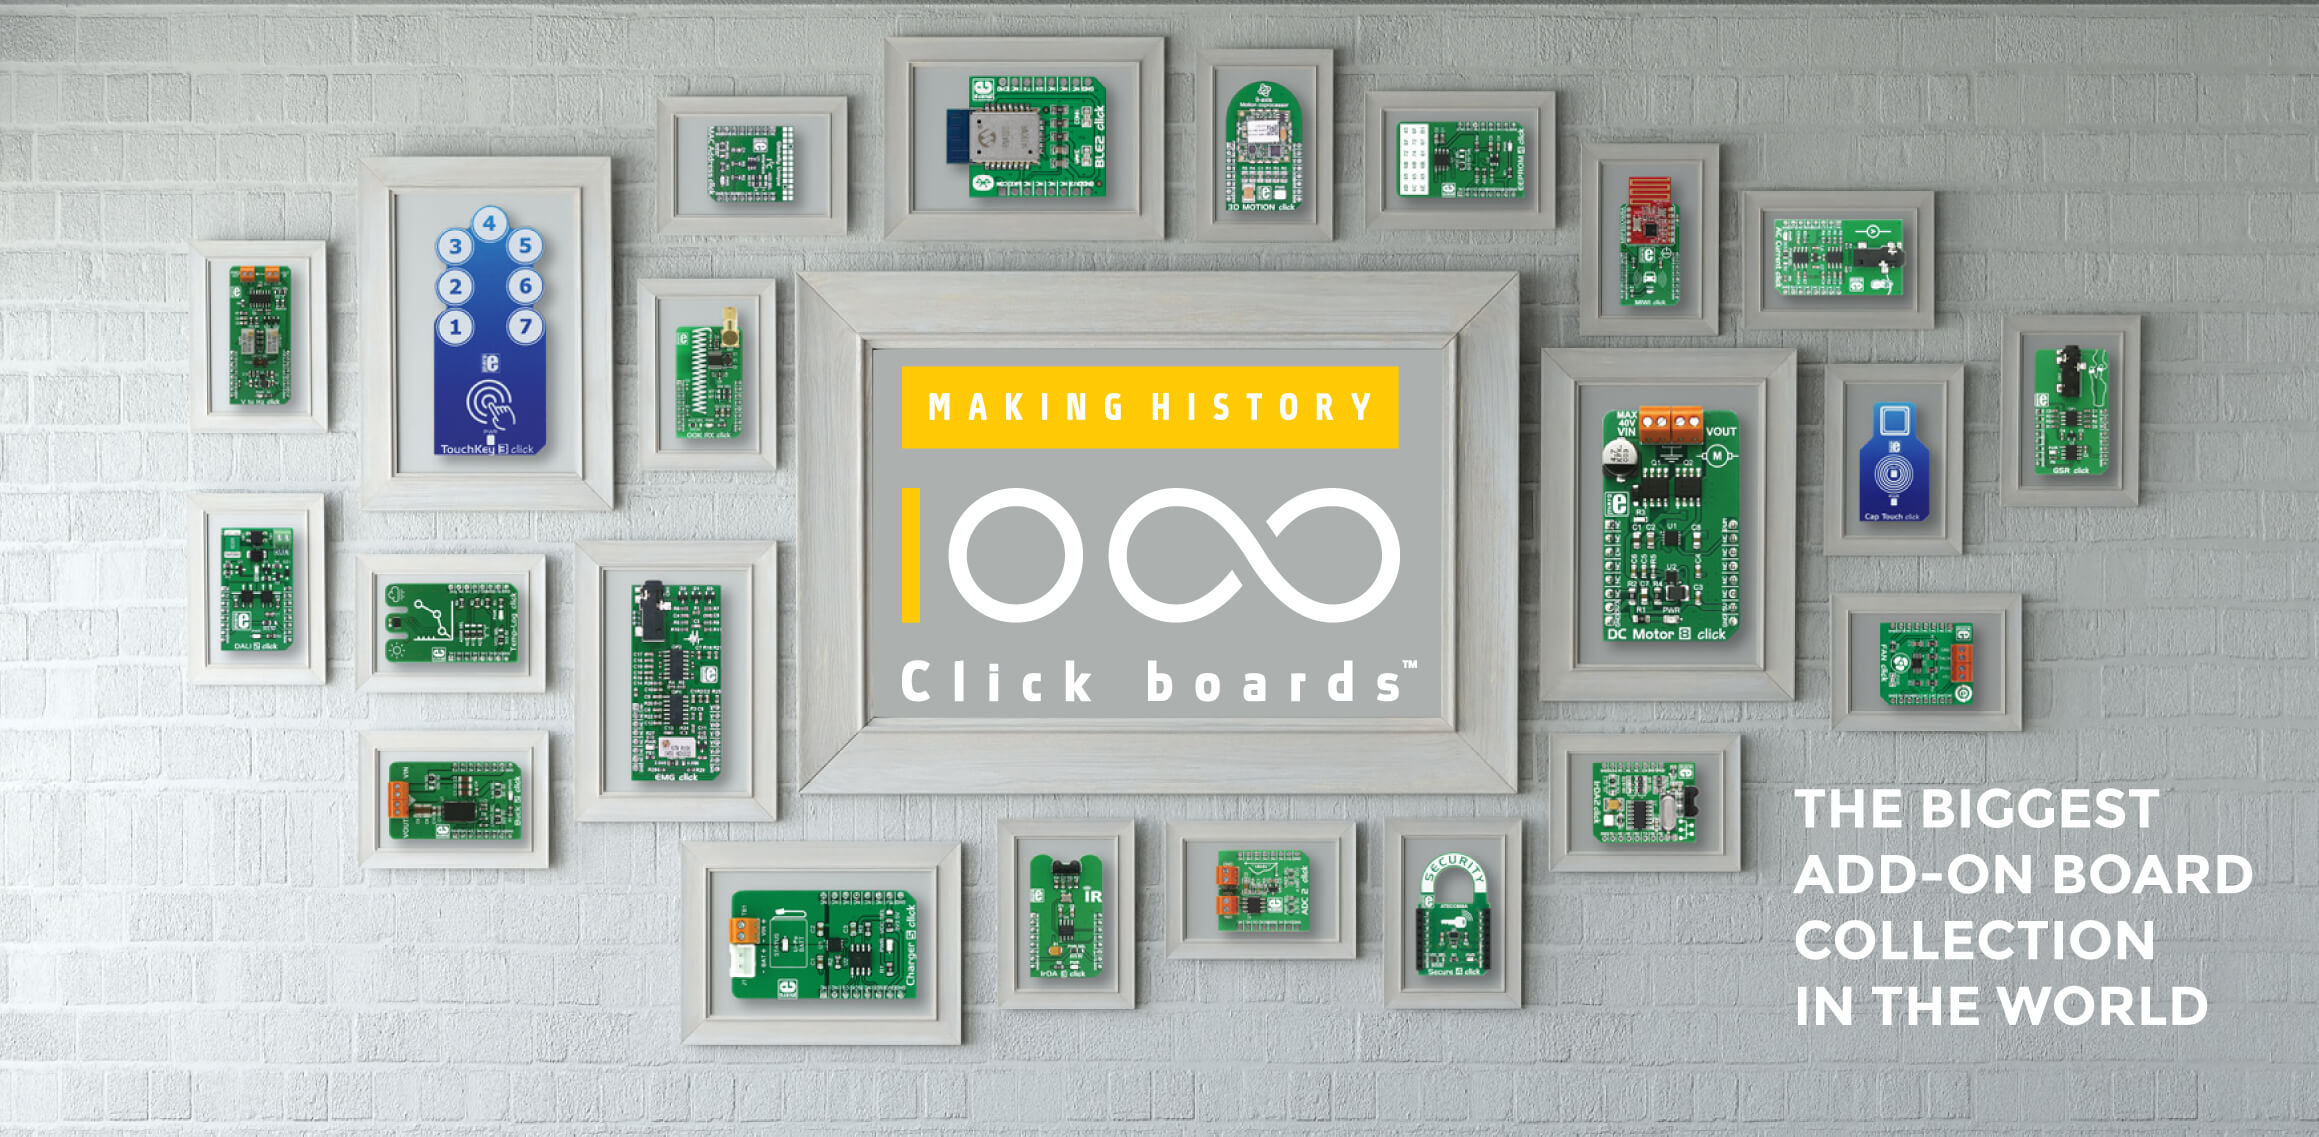 1000 click boards we have reached history